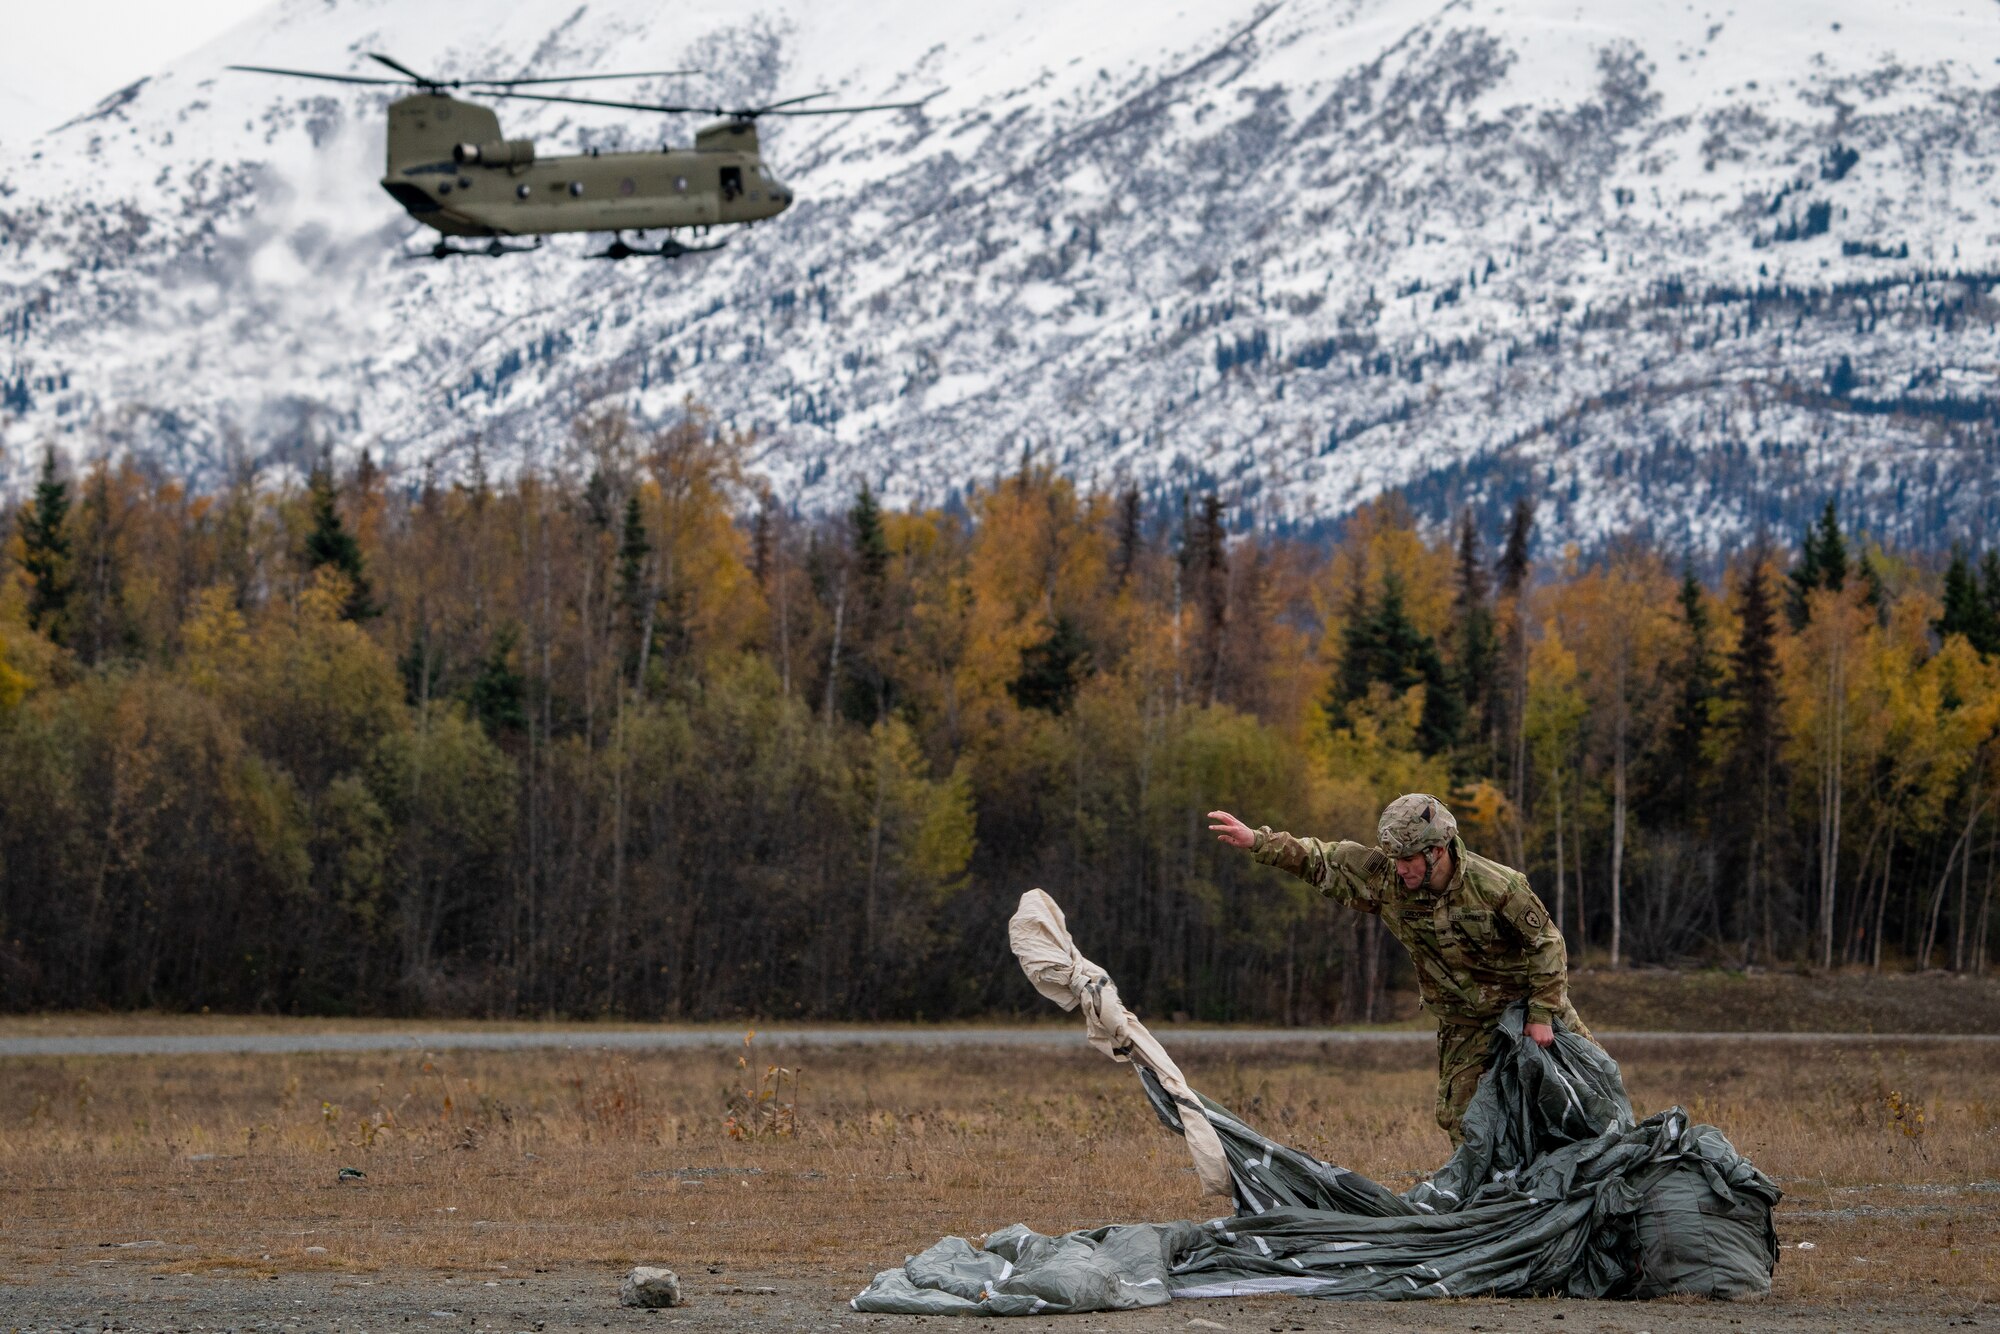 A U.S. Army paratrooper assigned to the 1st Squadron (Airborne), 40th Cavalry Regiment, 4th Infantry Brigade Combat Team (Airborne), 25th Infantry Division, U.S. Army Alaska, recovers his parachute after jumping from a CH-47 Chinook